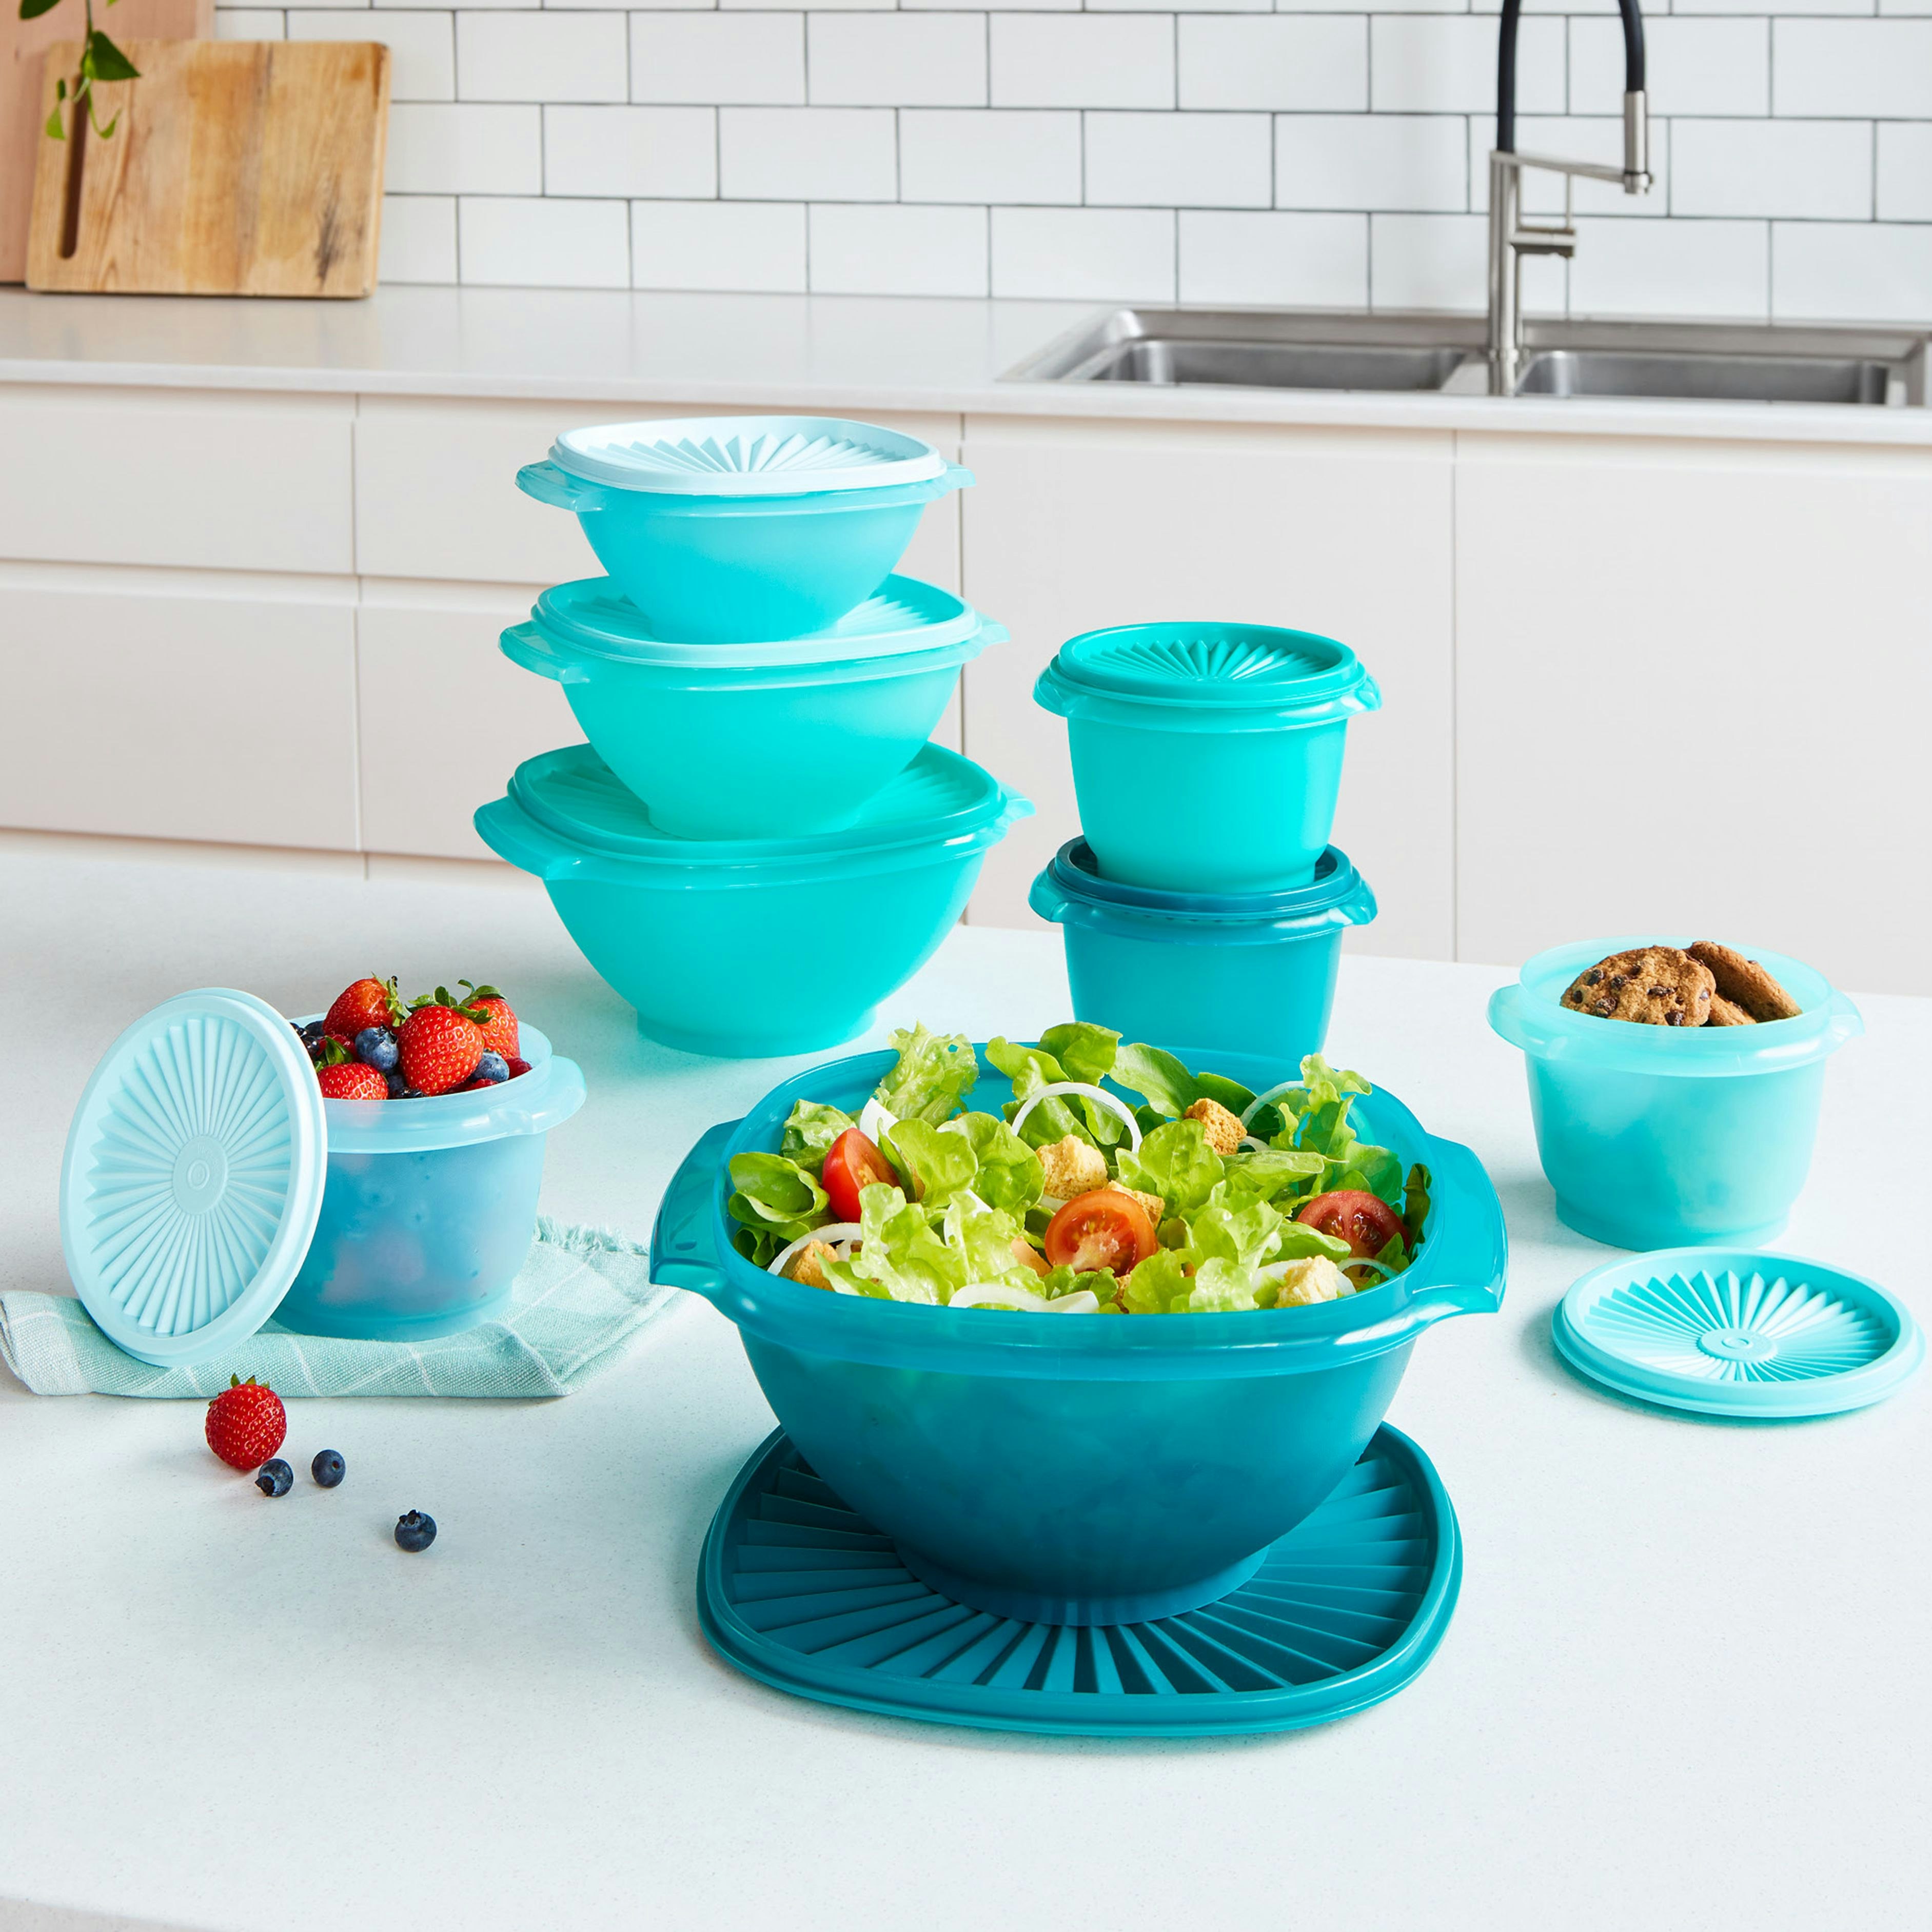 Laine Home brings Tupperware back to NZ